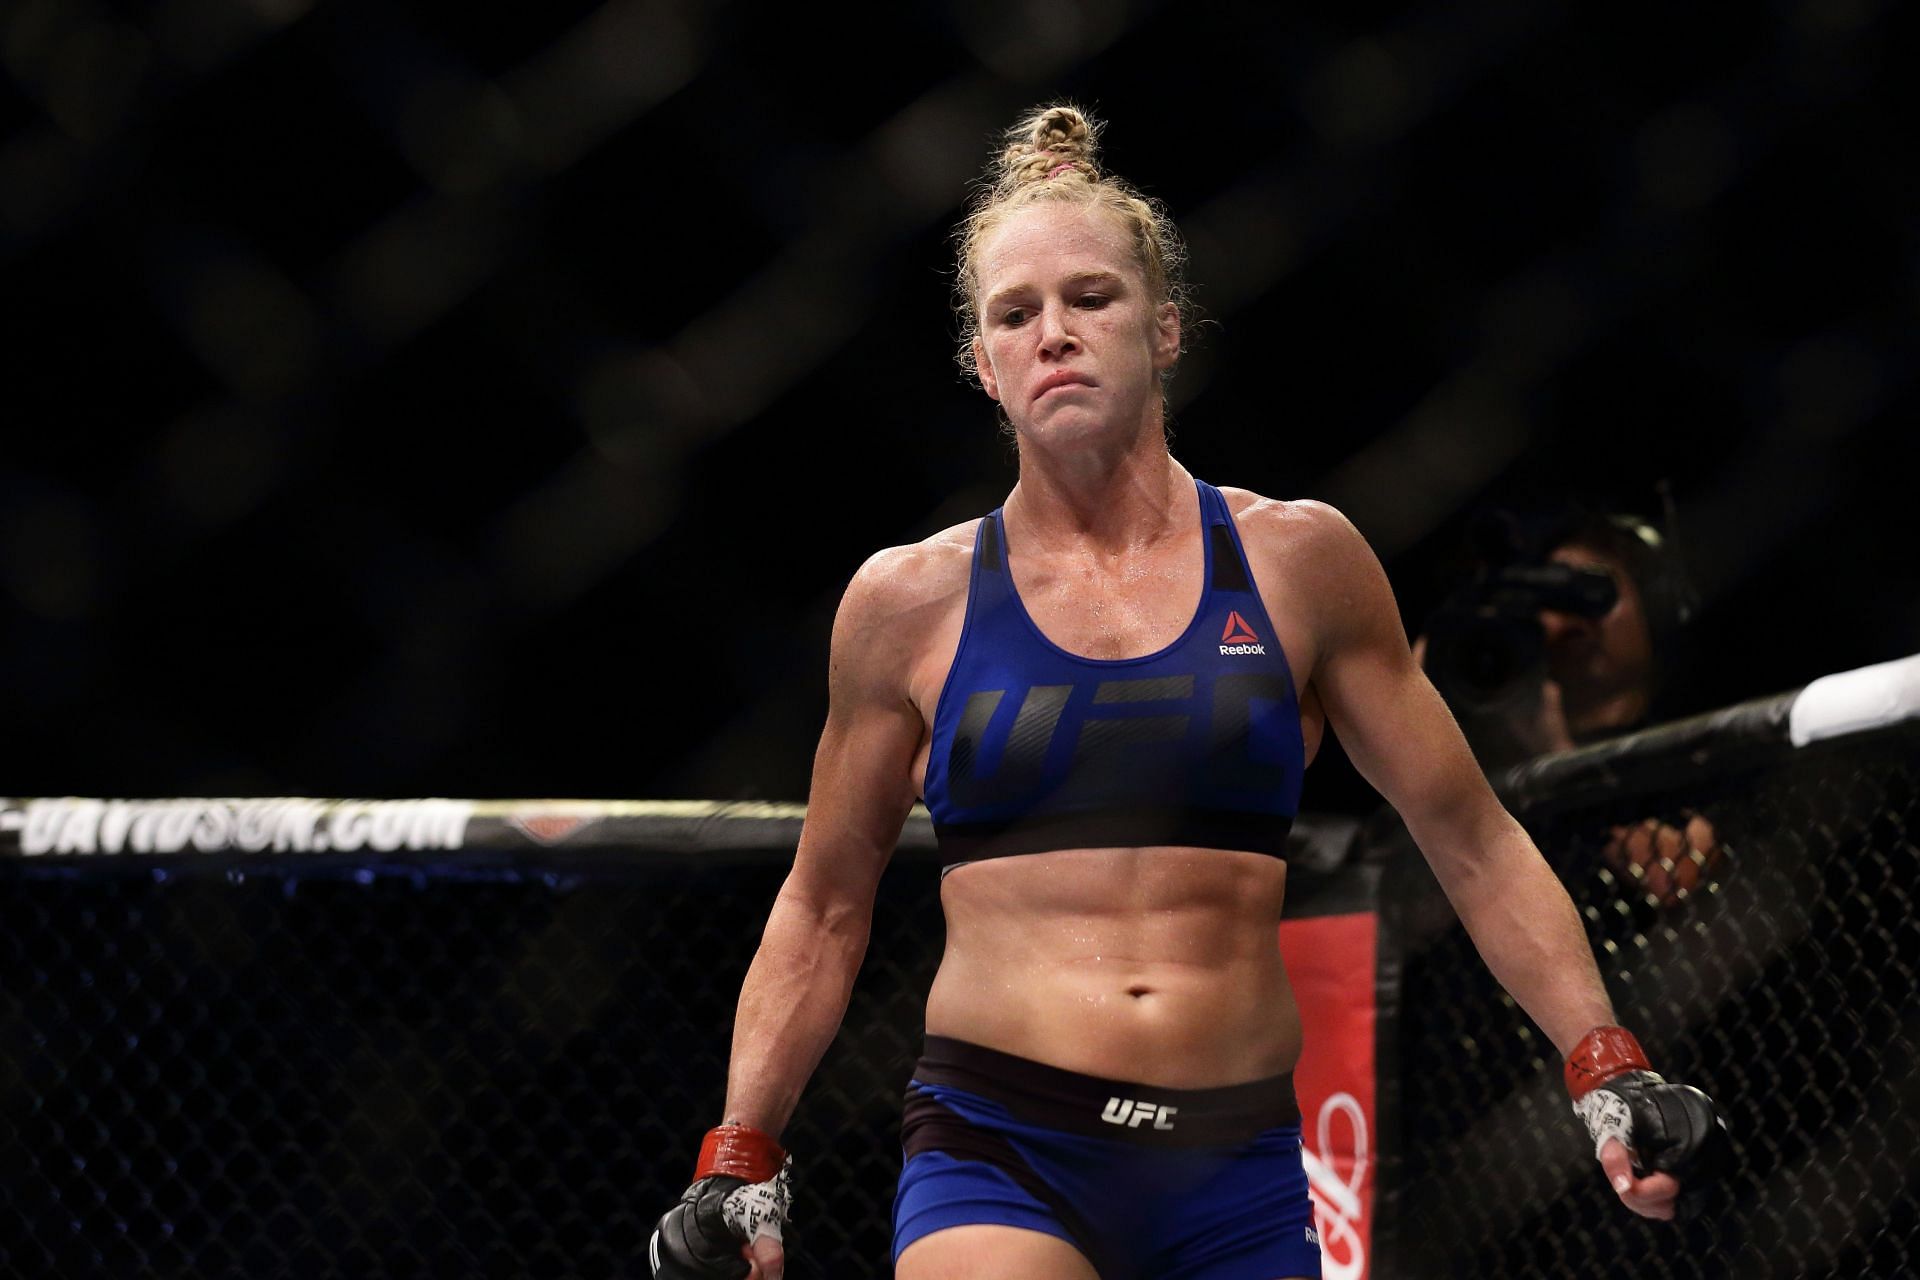 Holly Holm has a record of 14-6